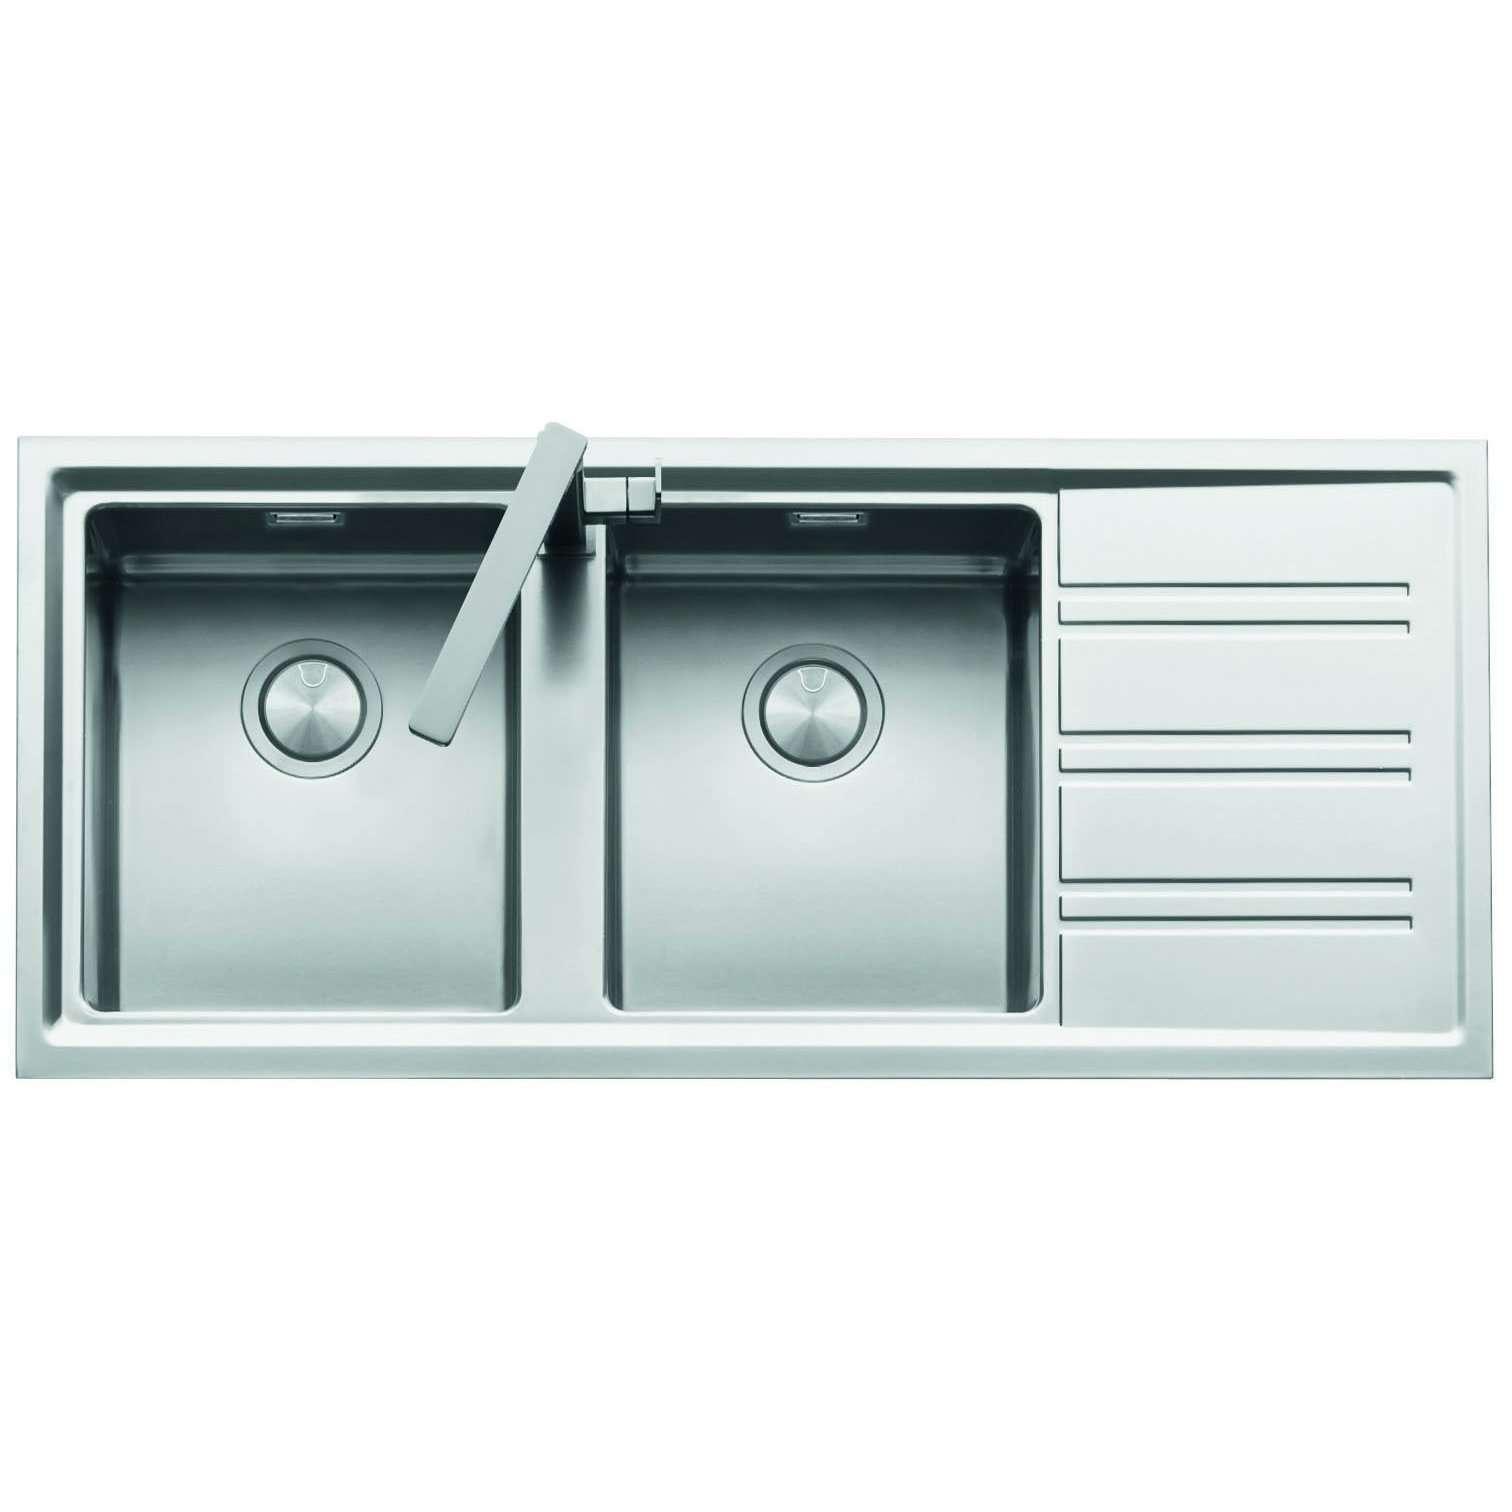 Abey Barazza Easy 200 Double Bowl Sink Only S/S - Burdens Plumbing